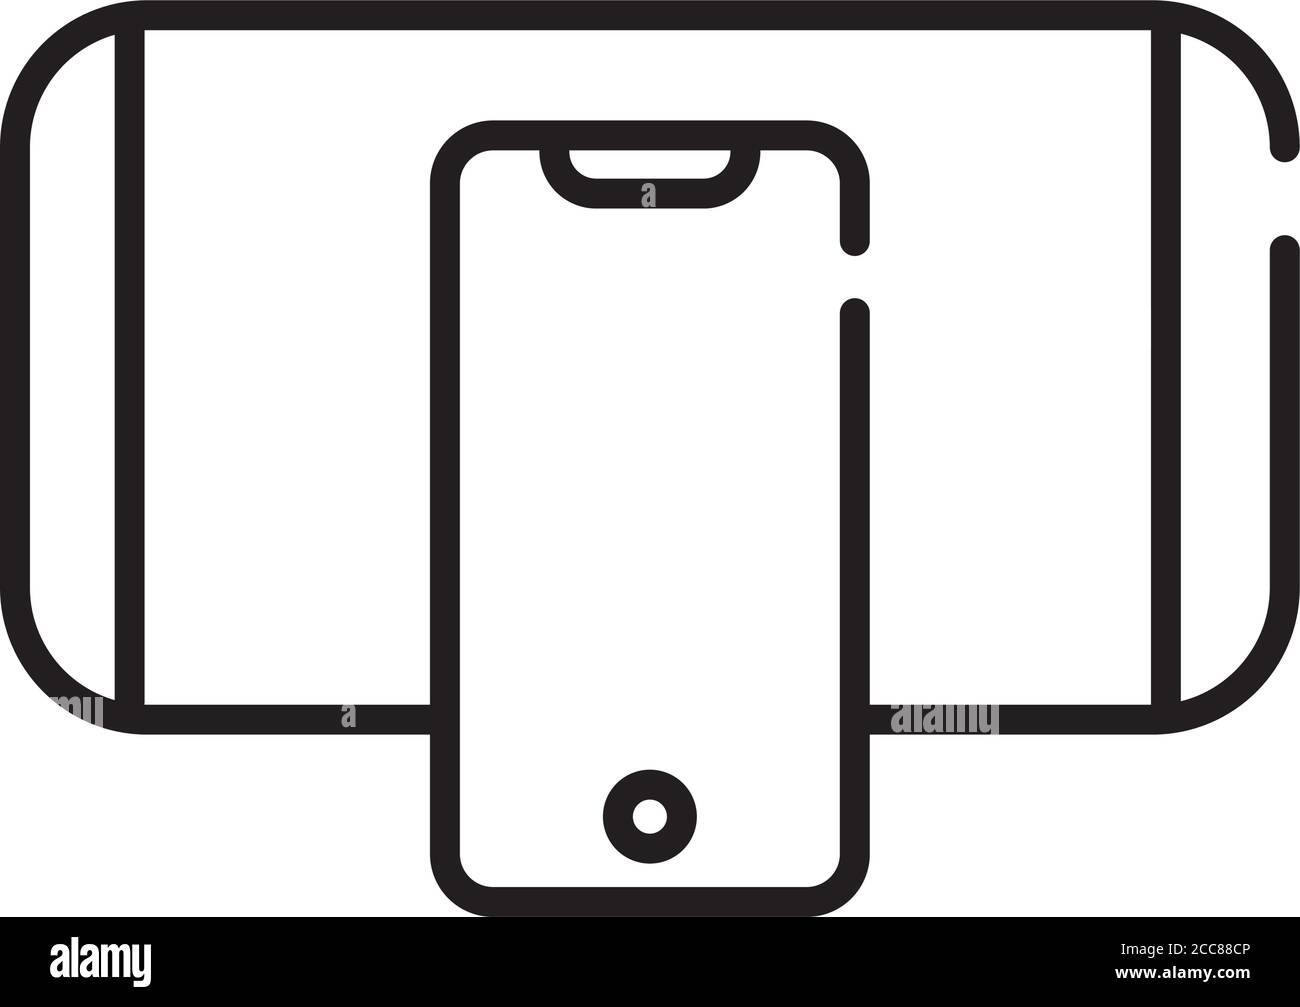 smartphones devices line style icons vector illustration design Stock Vector